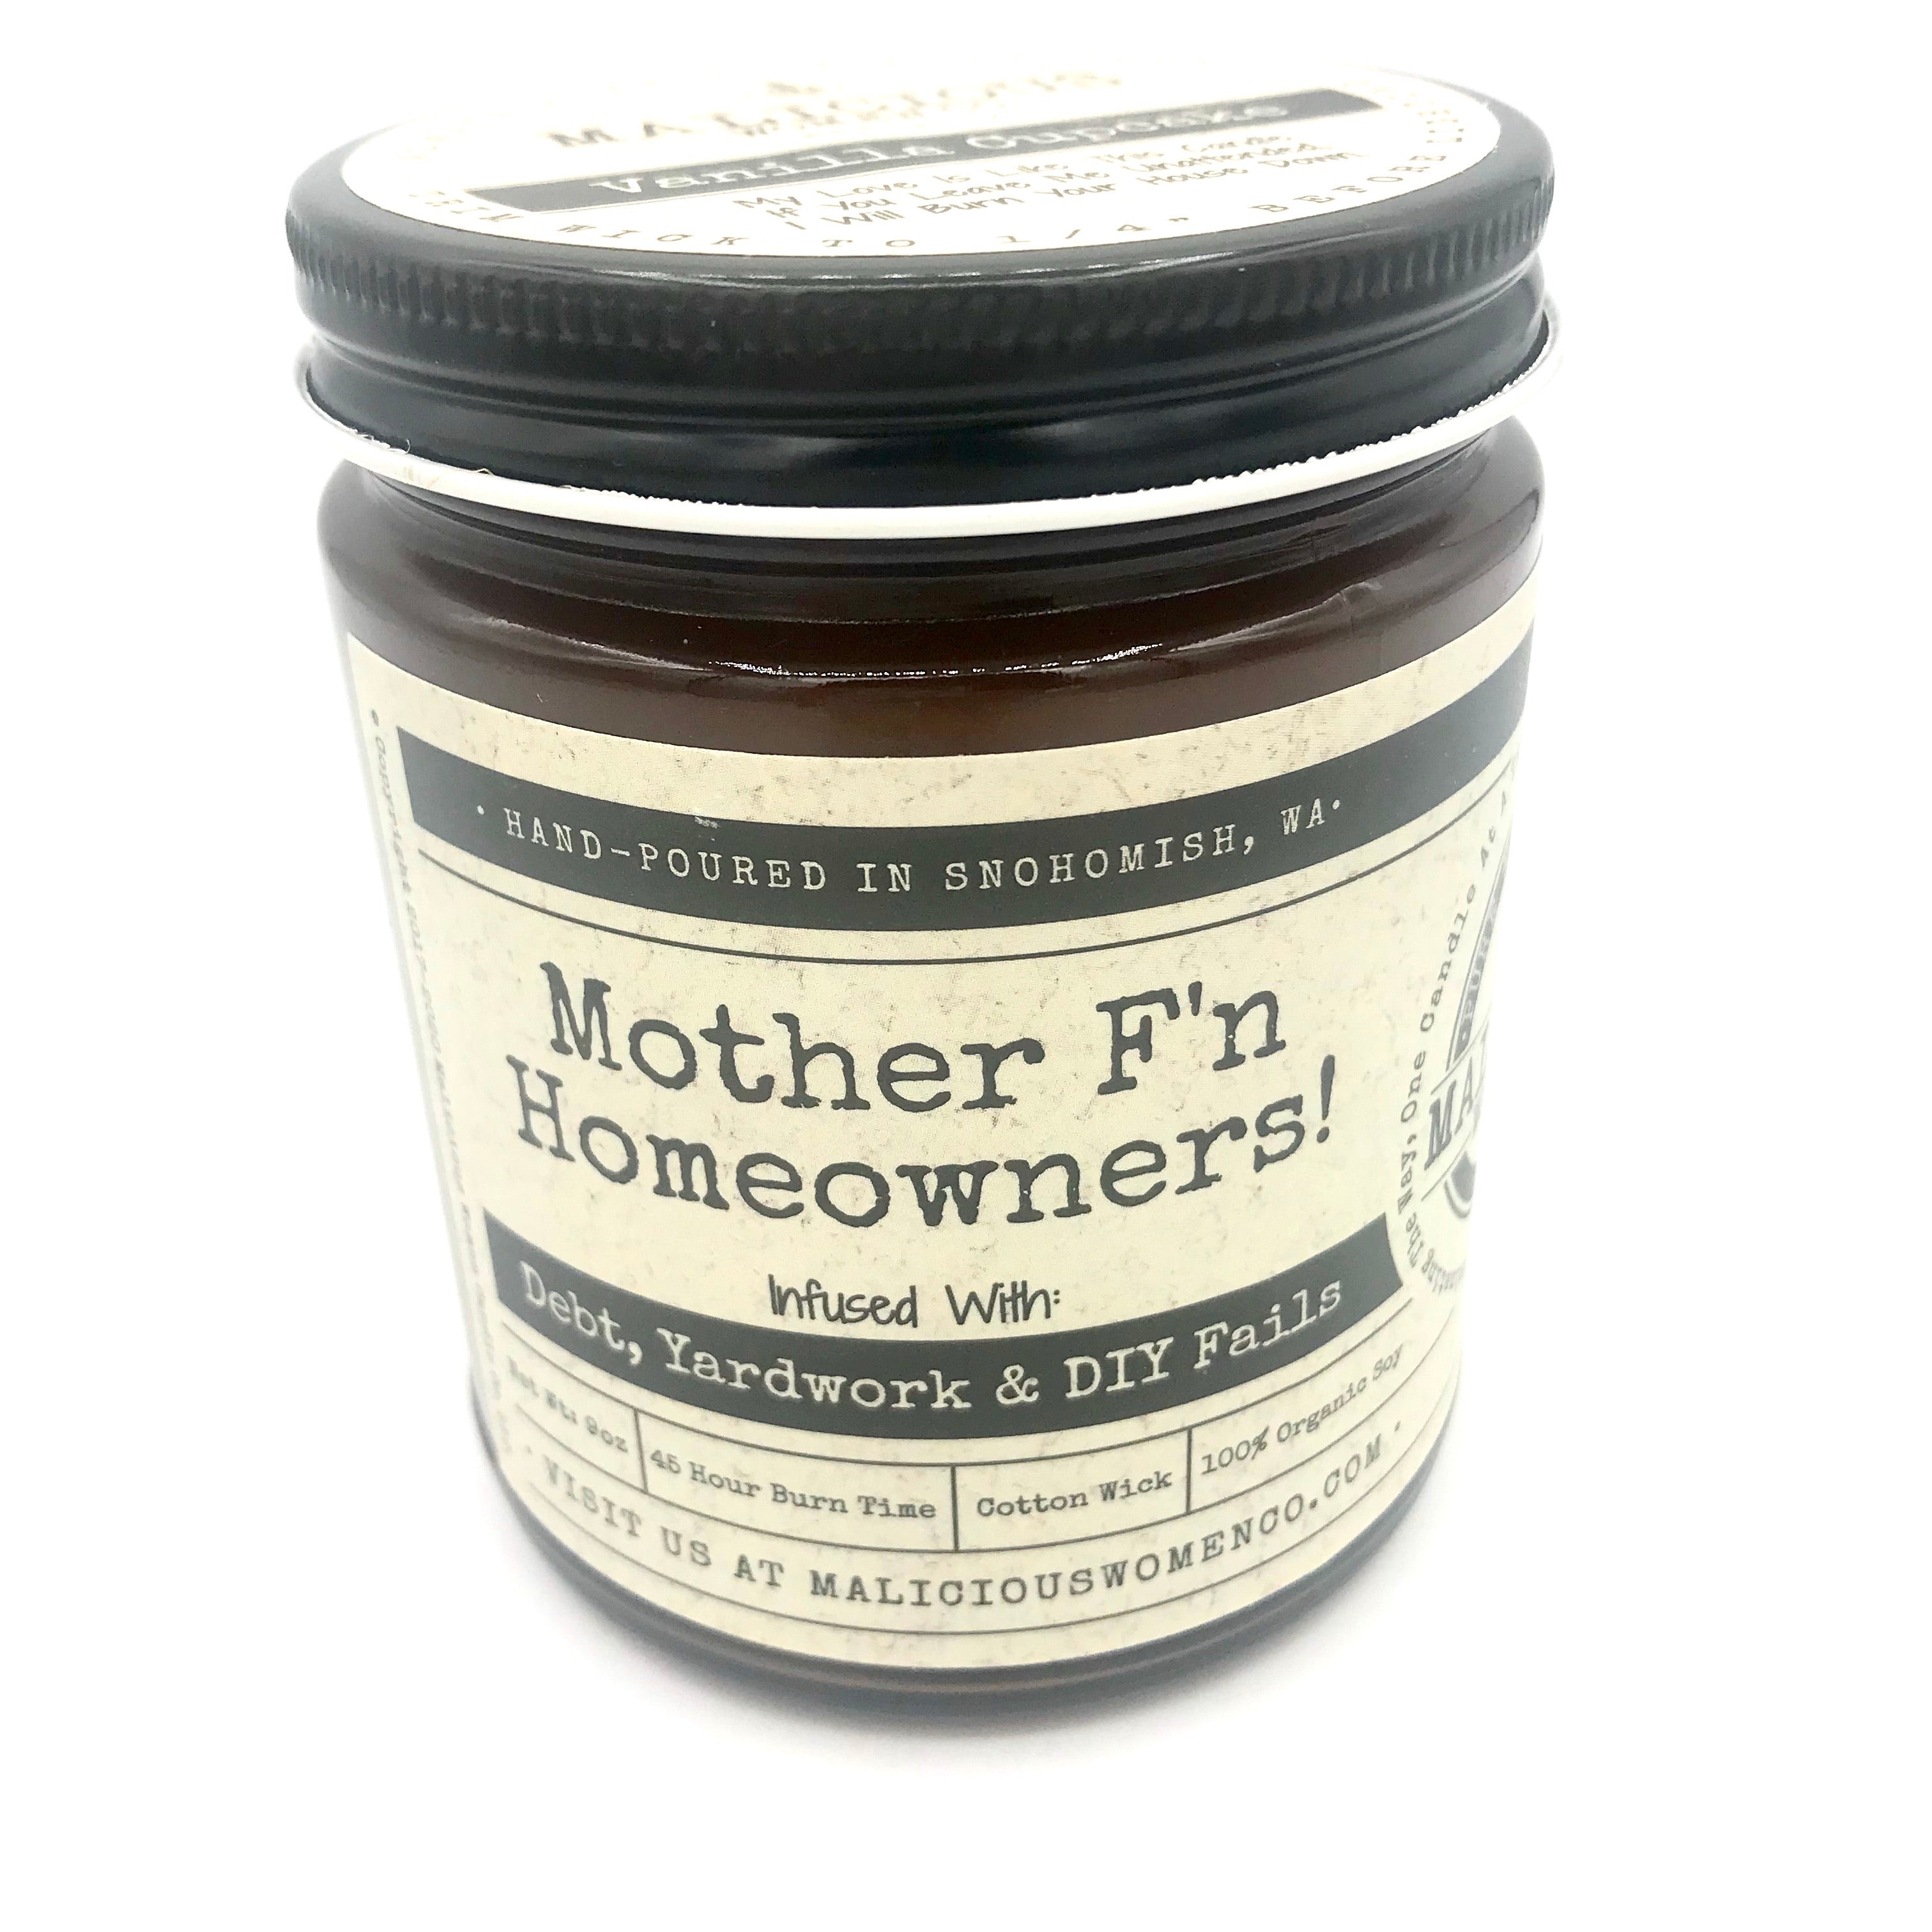 Mother F'n Homeowners! Infused With: "Debt, Yardwork, & DIY Fails" | Vanilla Cupcake Scent